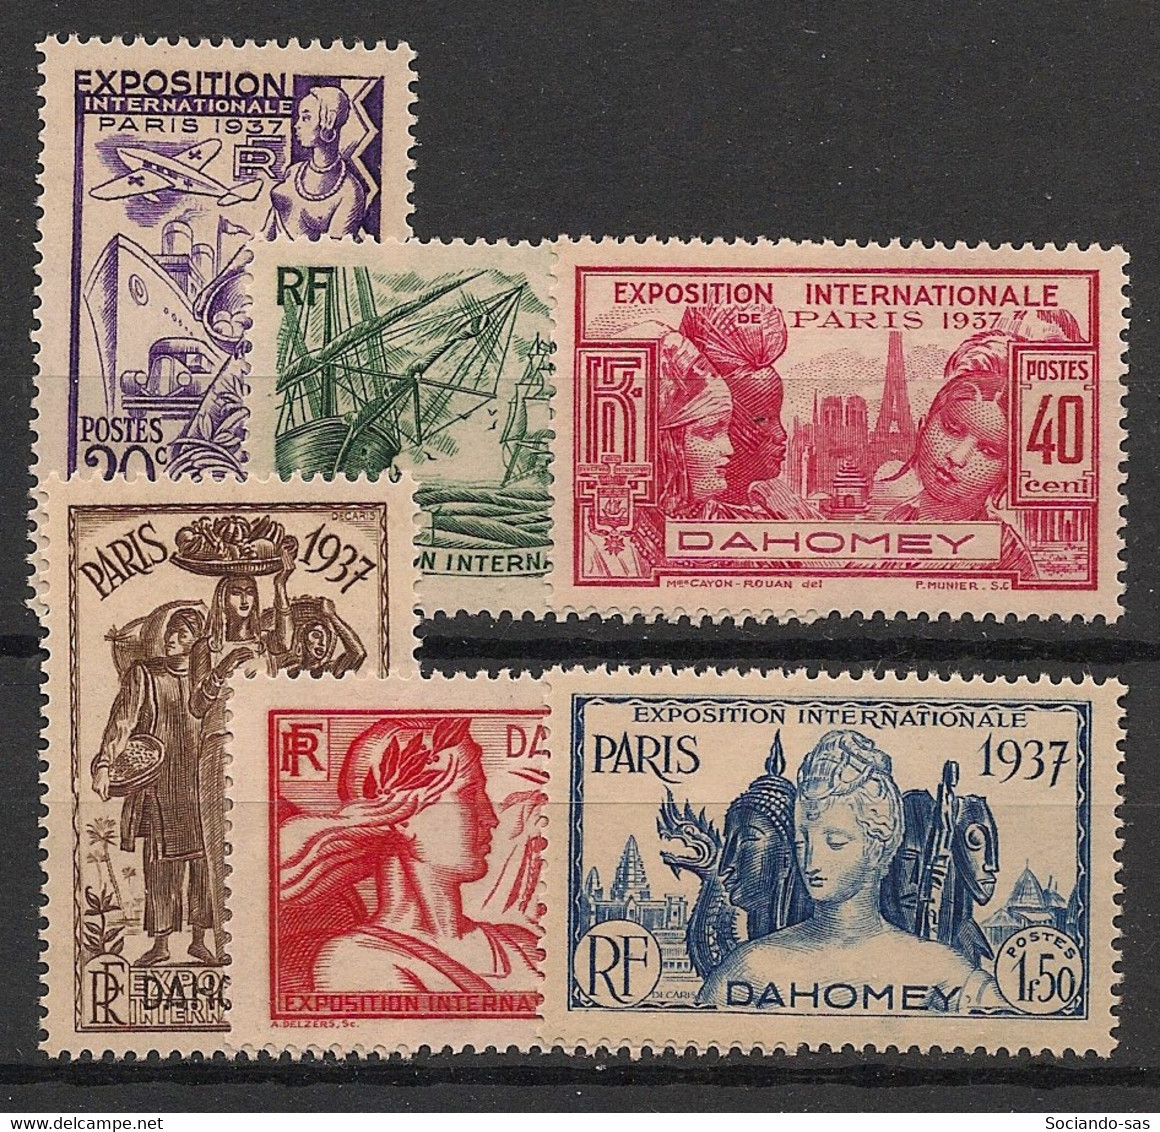 DAHOMEY - 1937 - N°YT. 103 à 108 - Exposition Internationale - Série Complète - Neuf * / MH VF - Unused Stamps